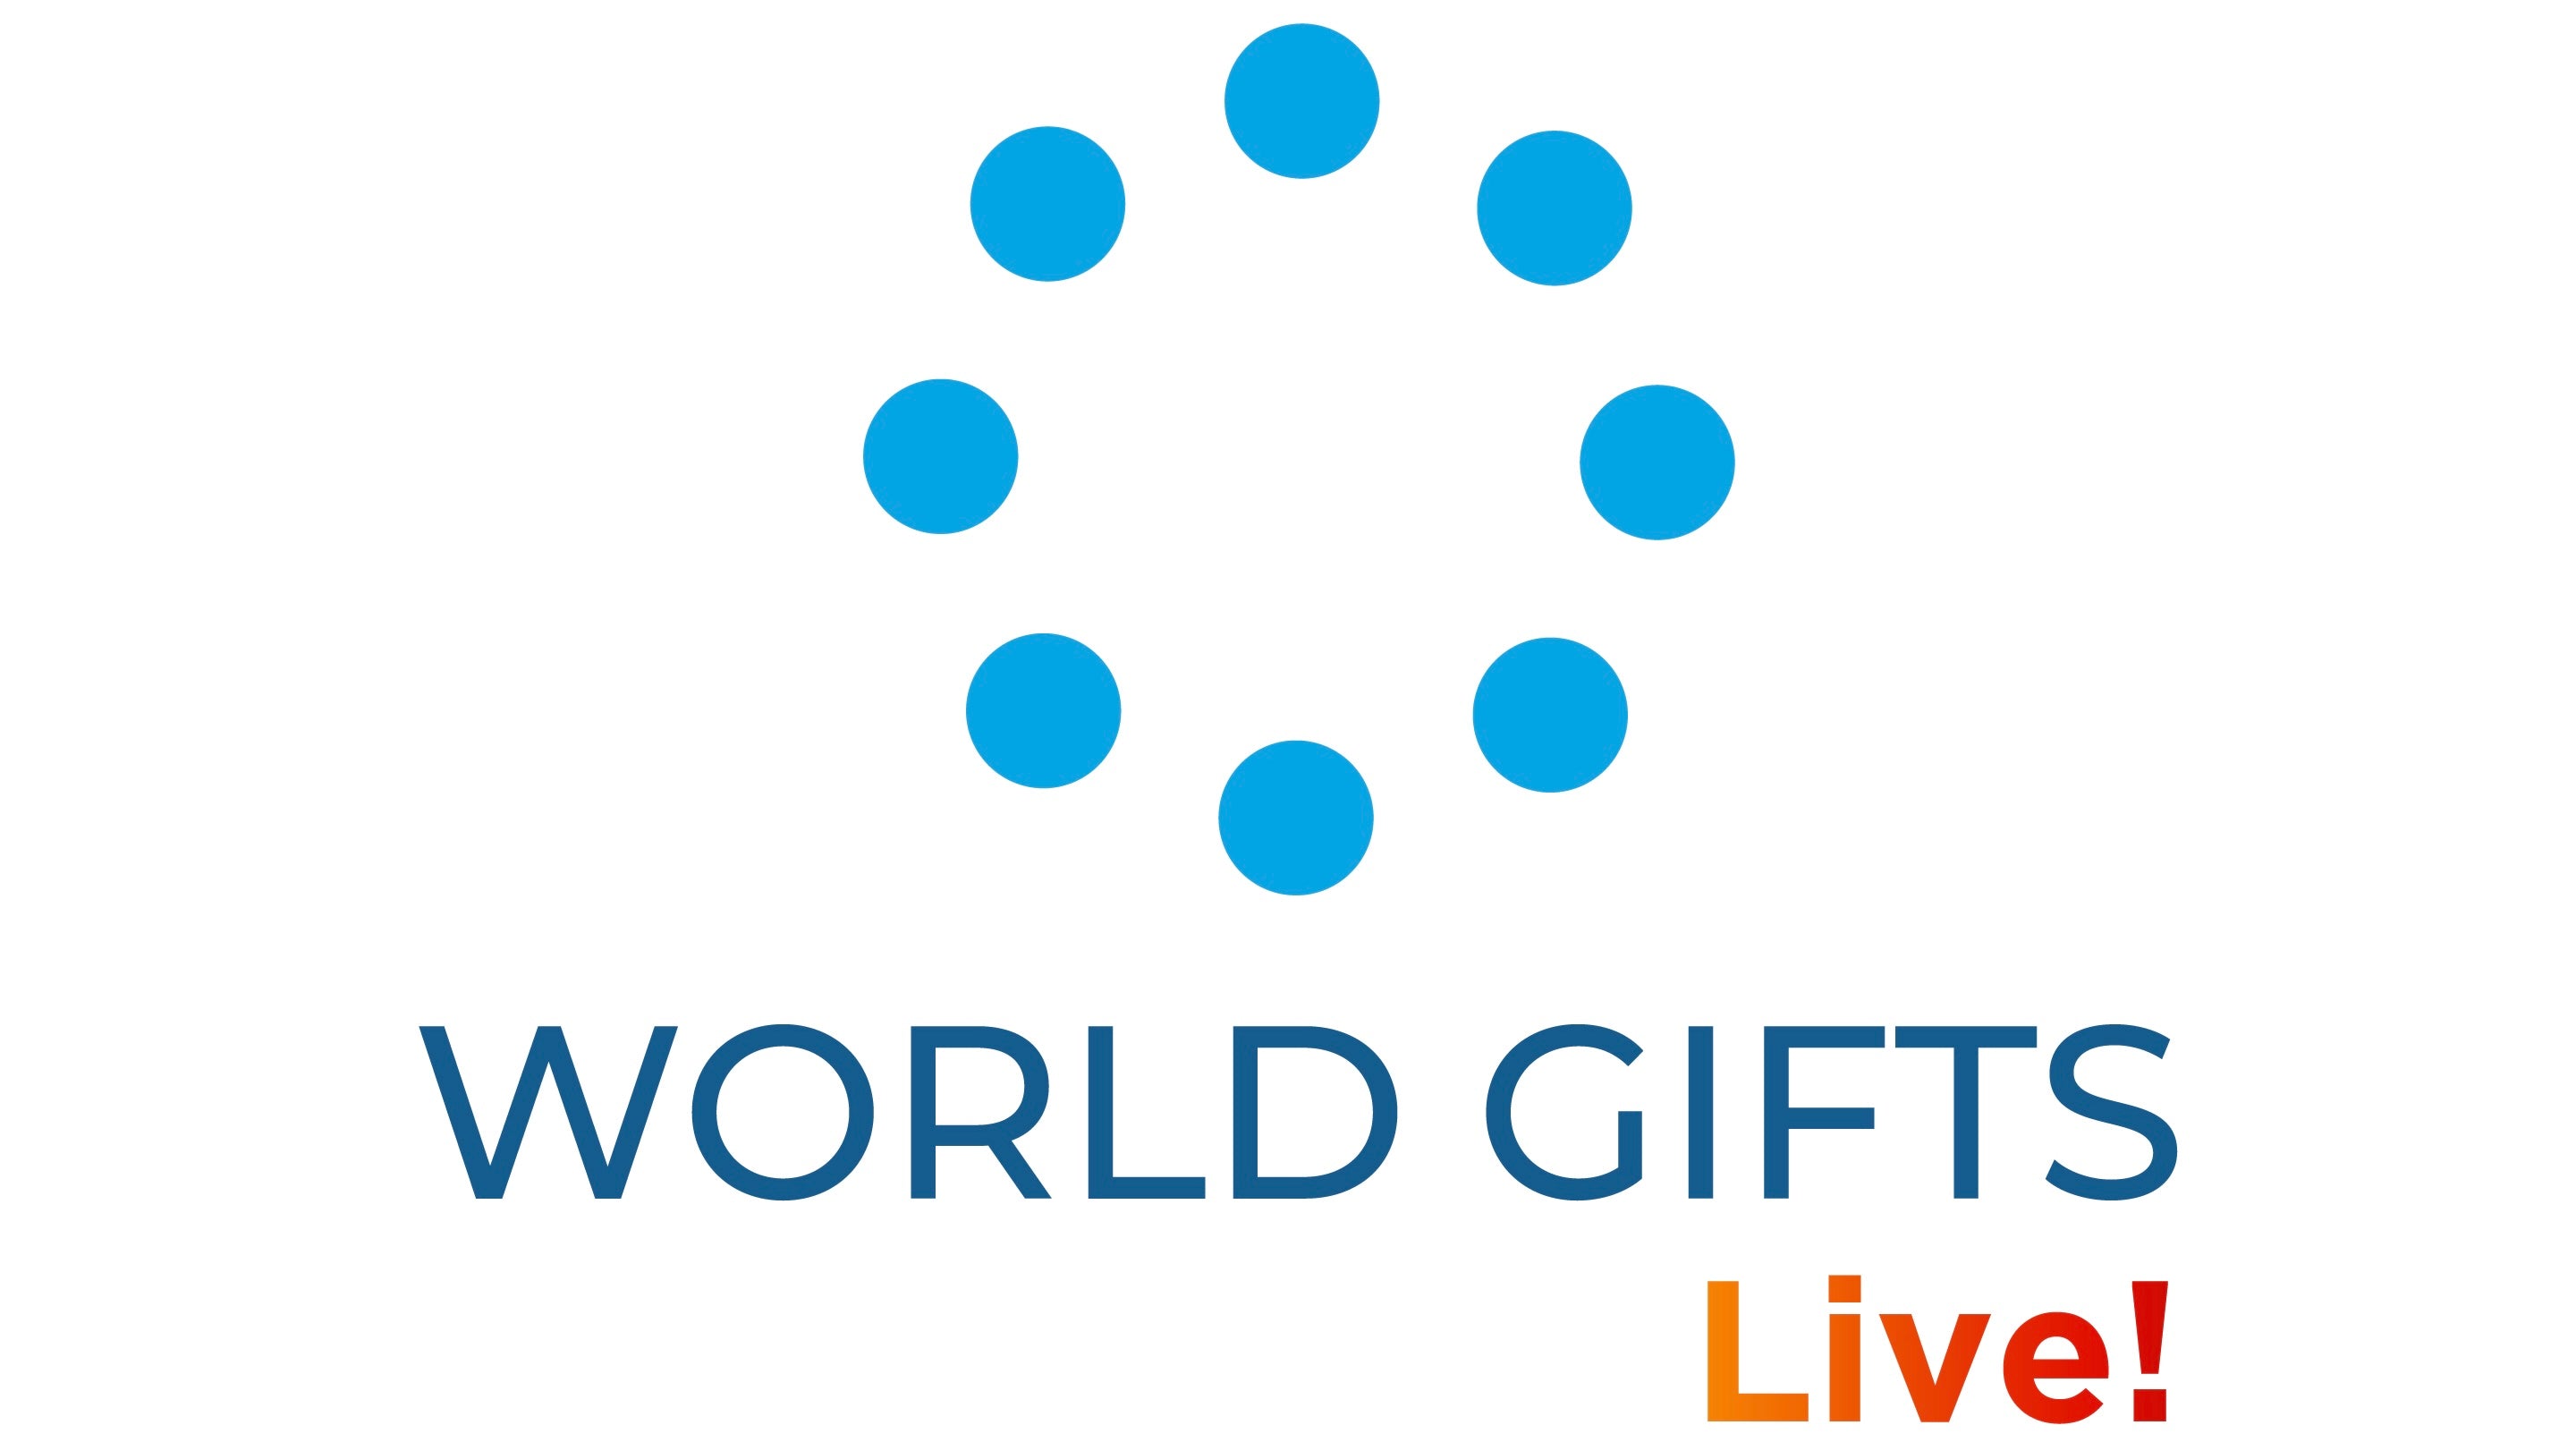 World Gifts Live!